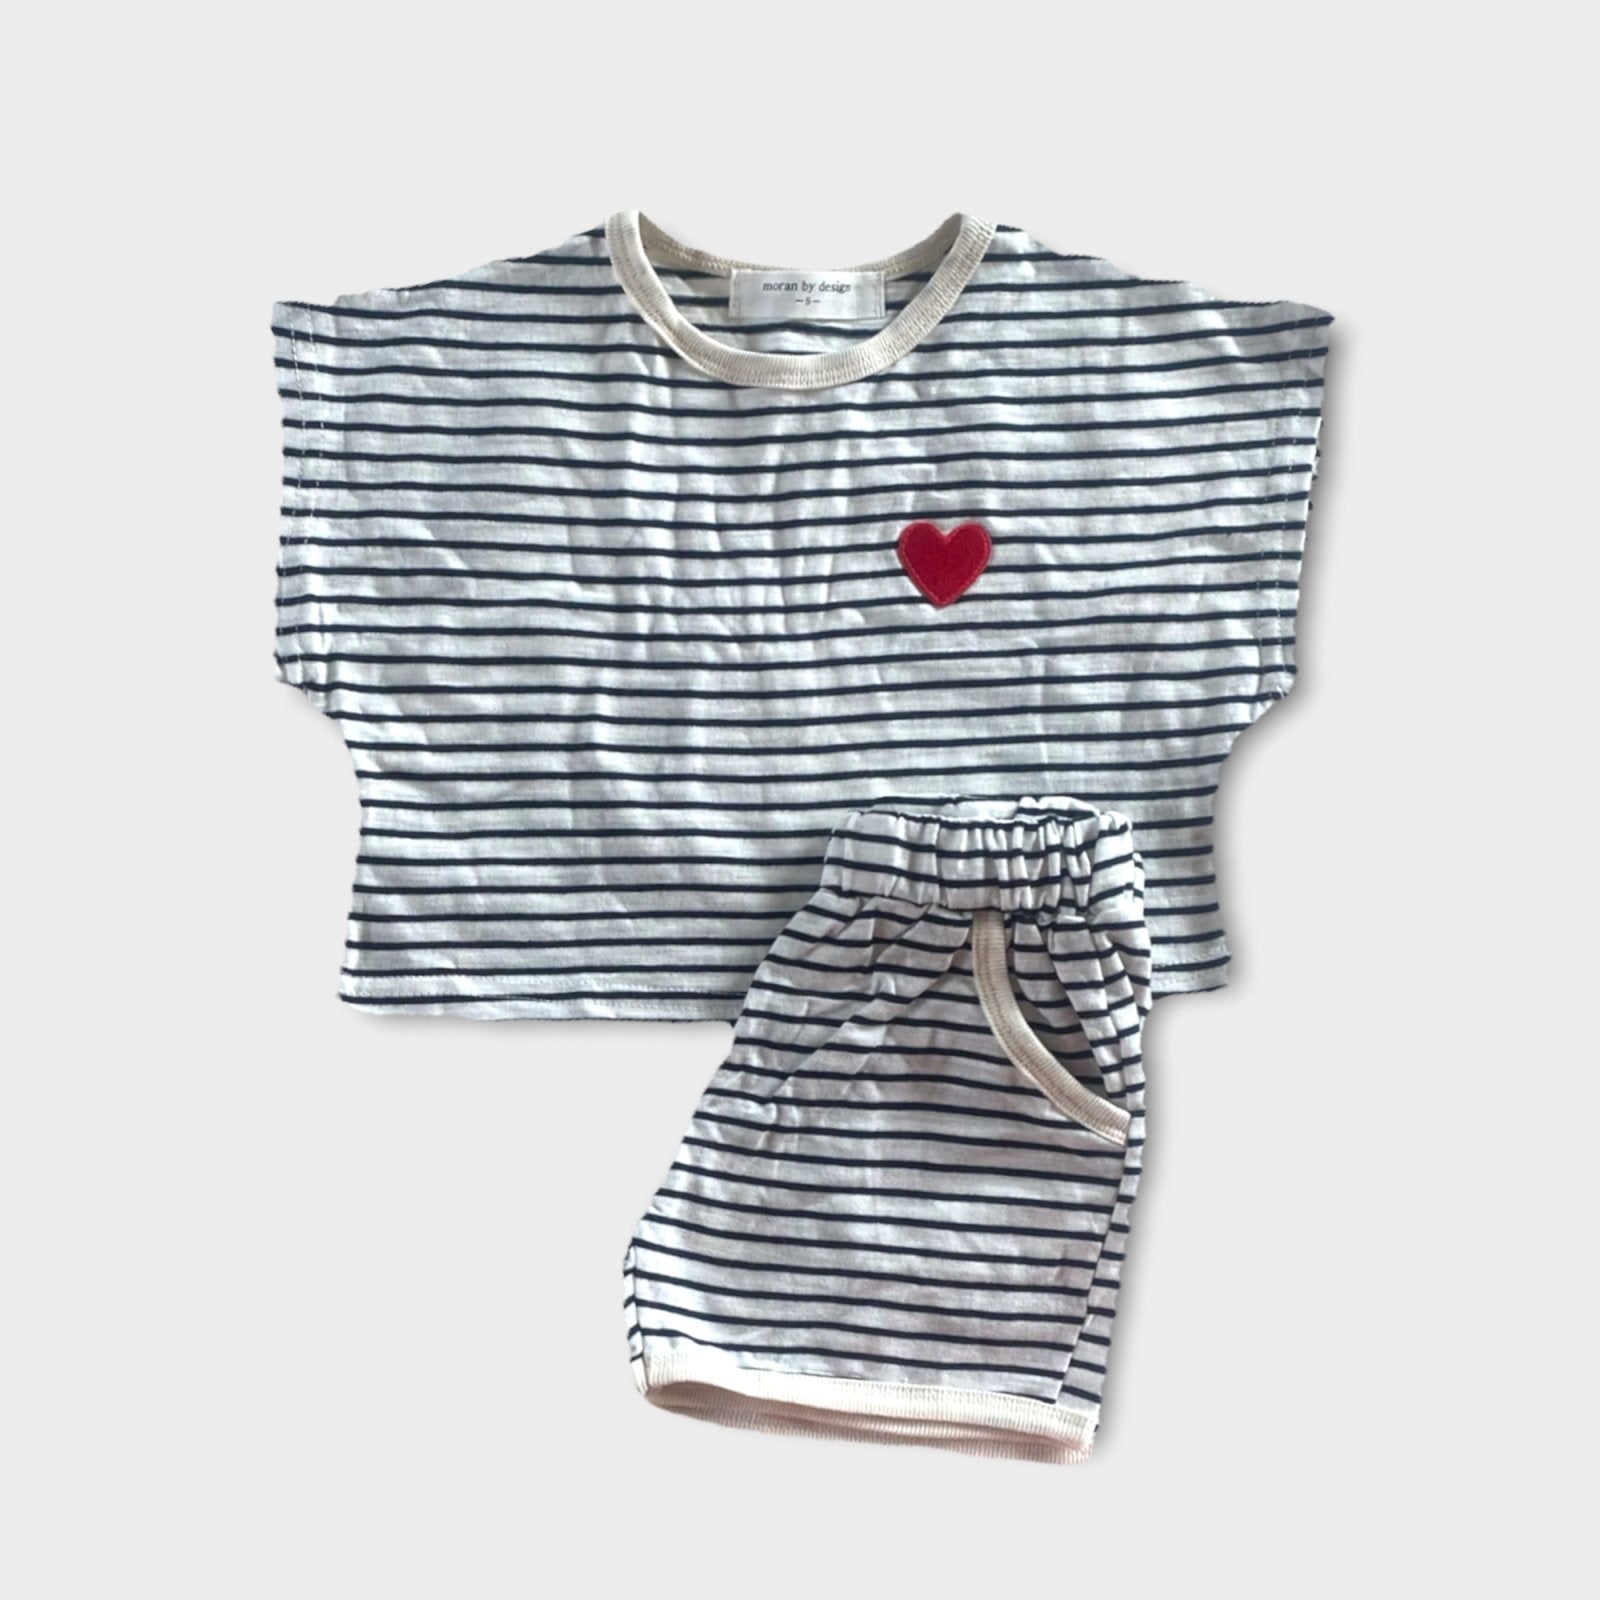 Mini Heart Set find Stylish Fashion for Little People- at Little Foxx Concept Store